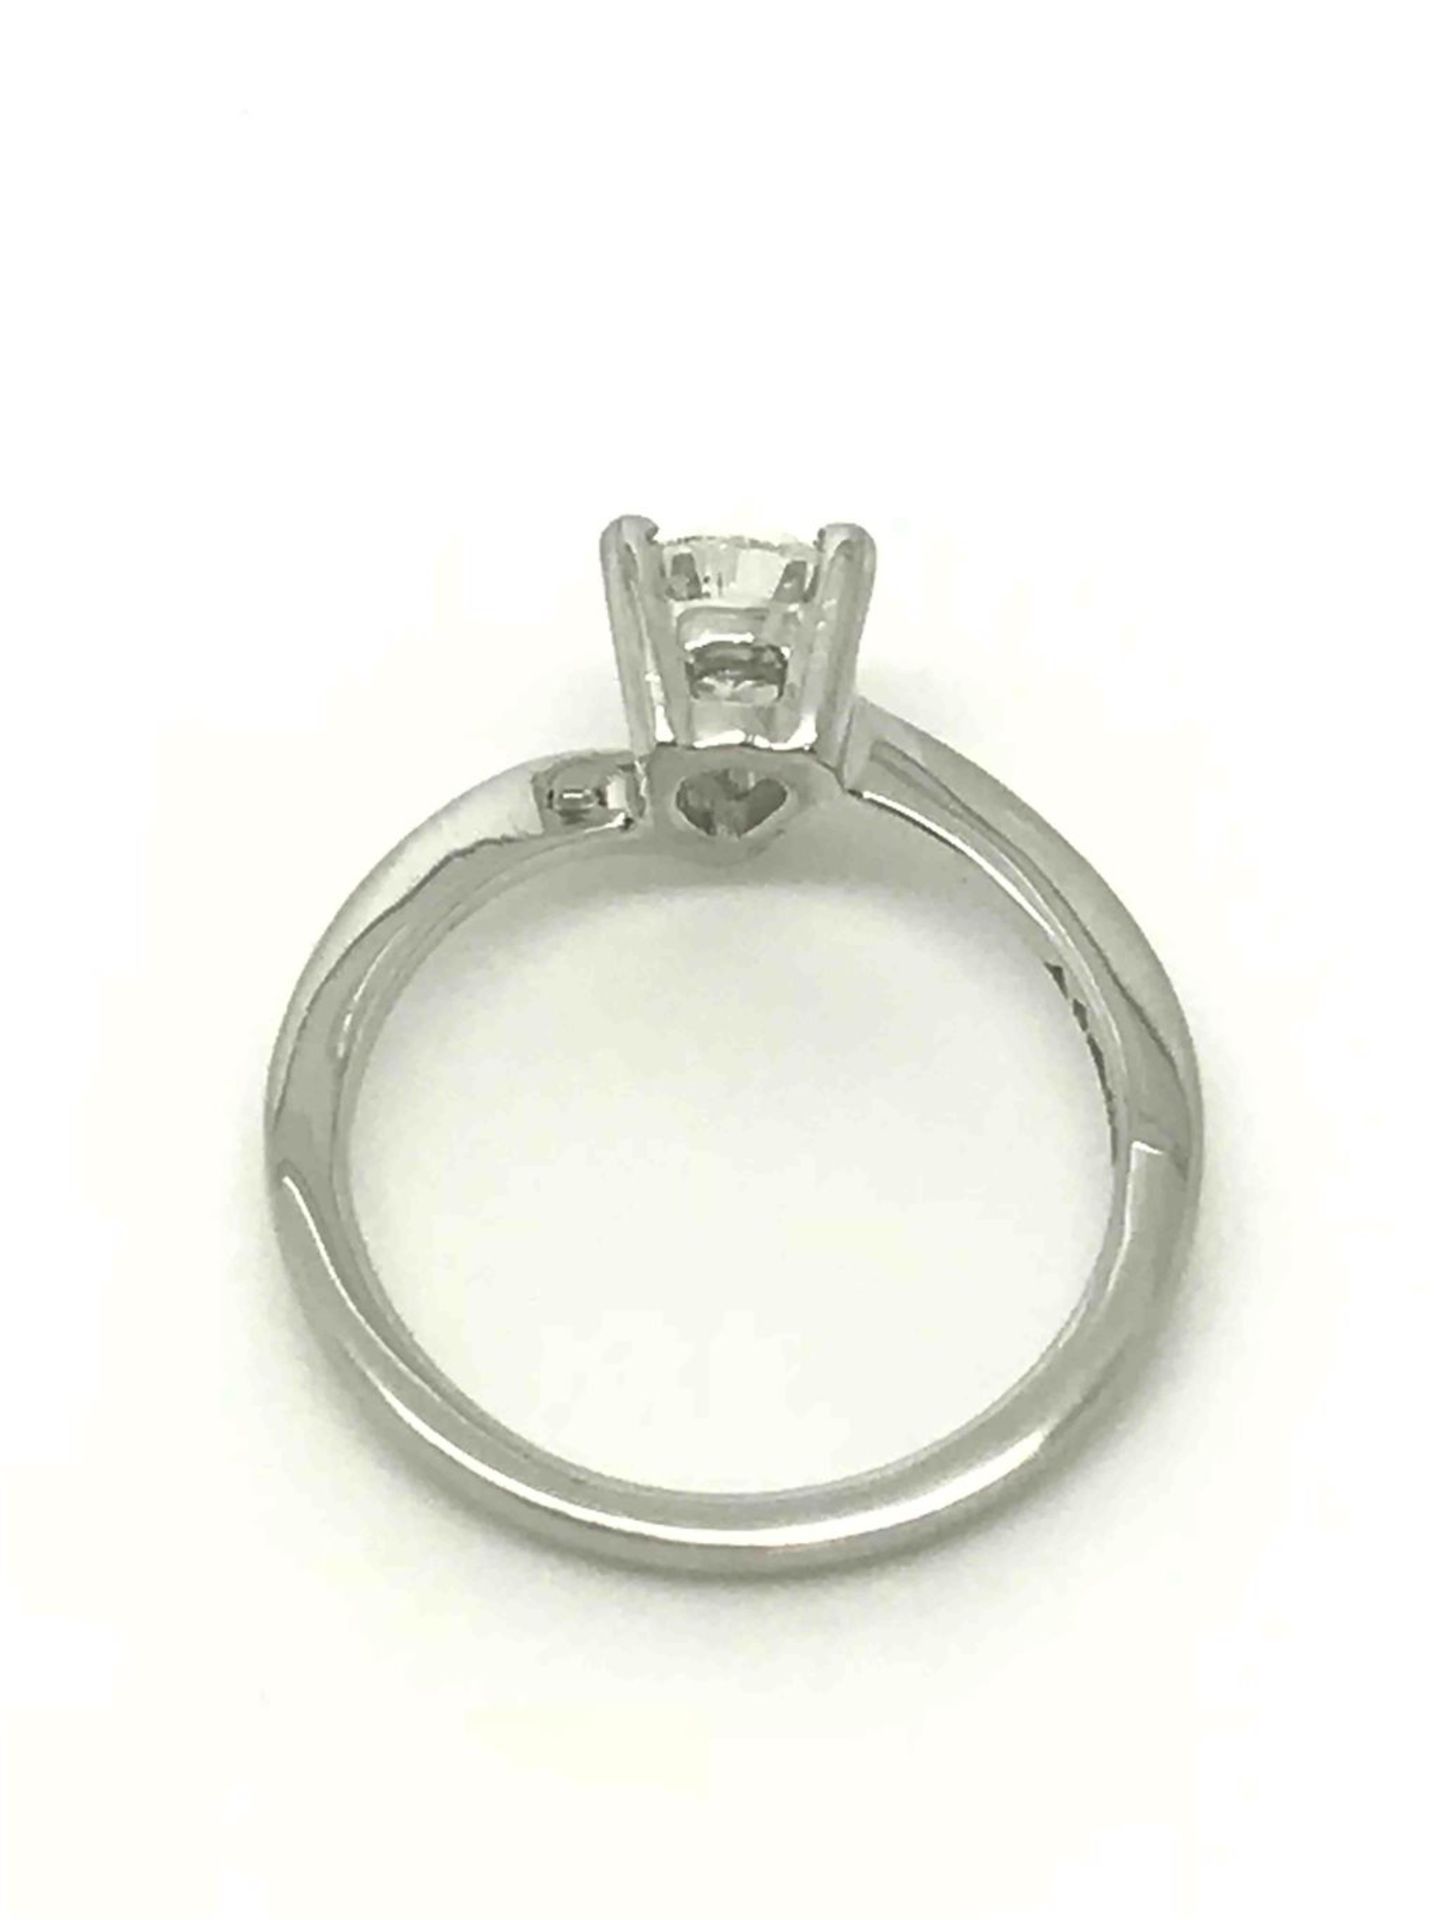 EGL Certificated 0.70ct Pear Cut Diamond Single Stone Ring - Image 3 of 4